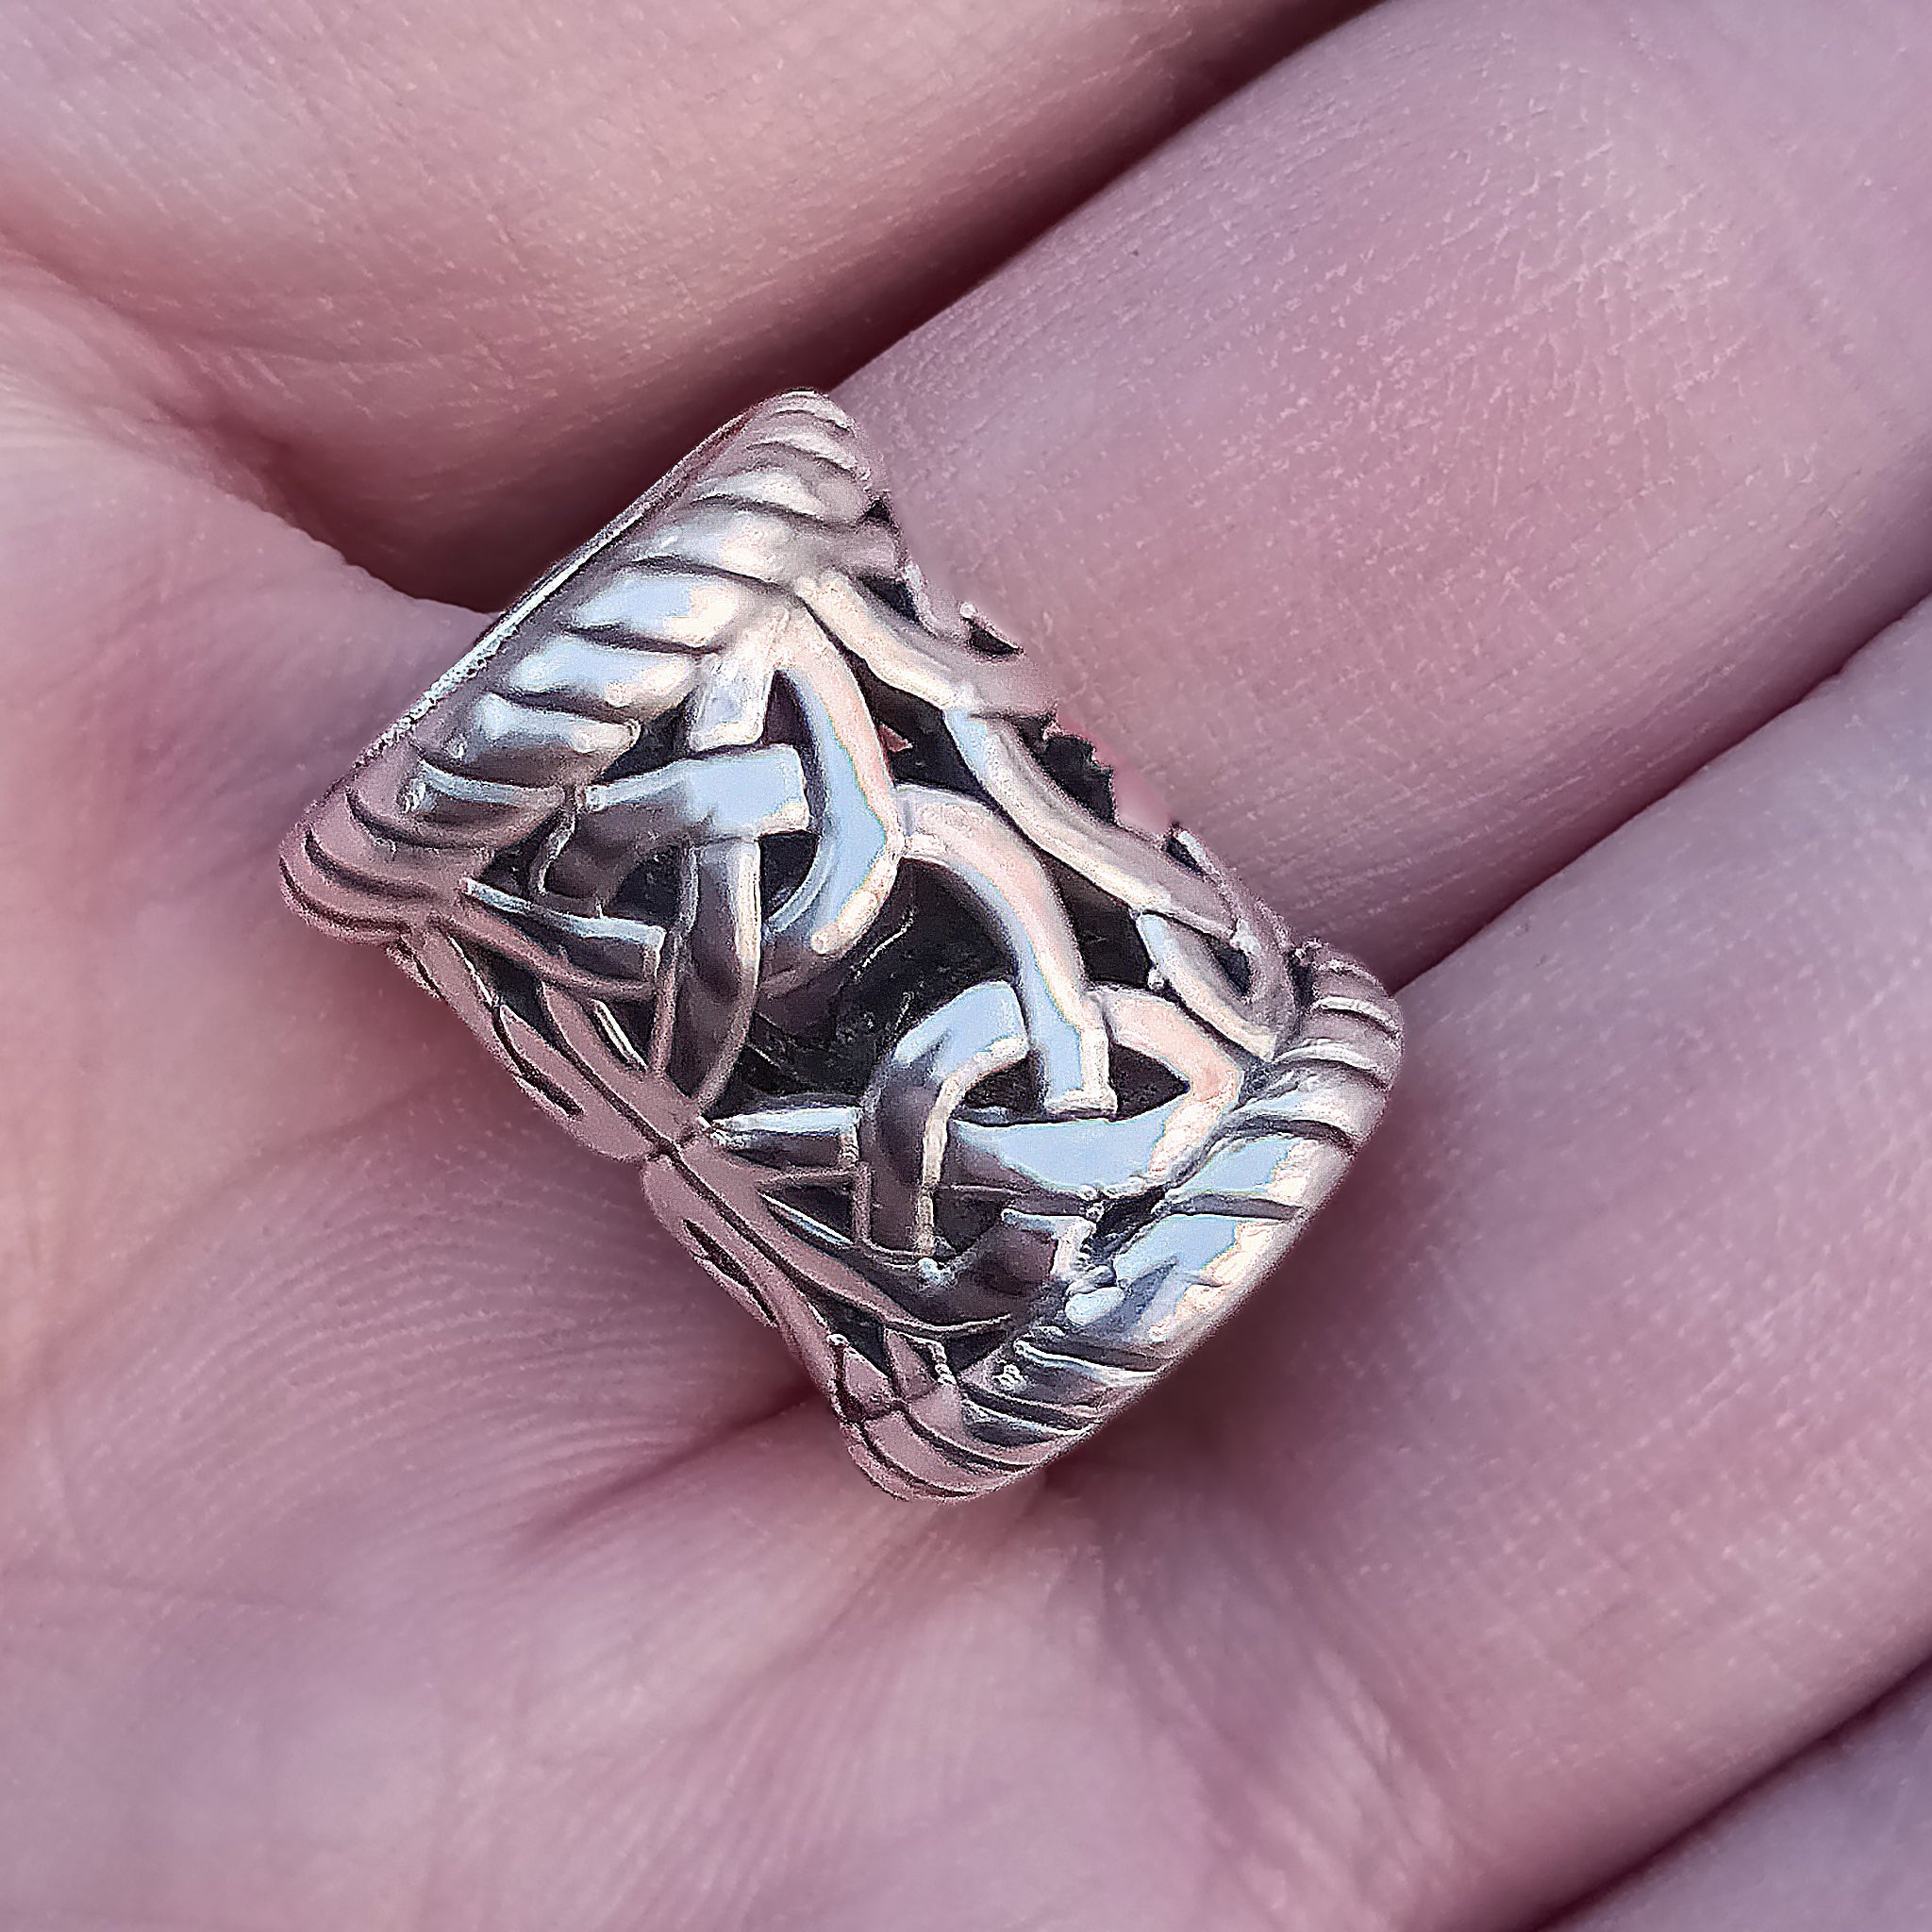 Large Openwork Viking Beard Ring in Silver on Hand